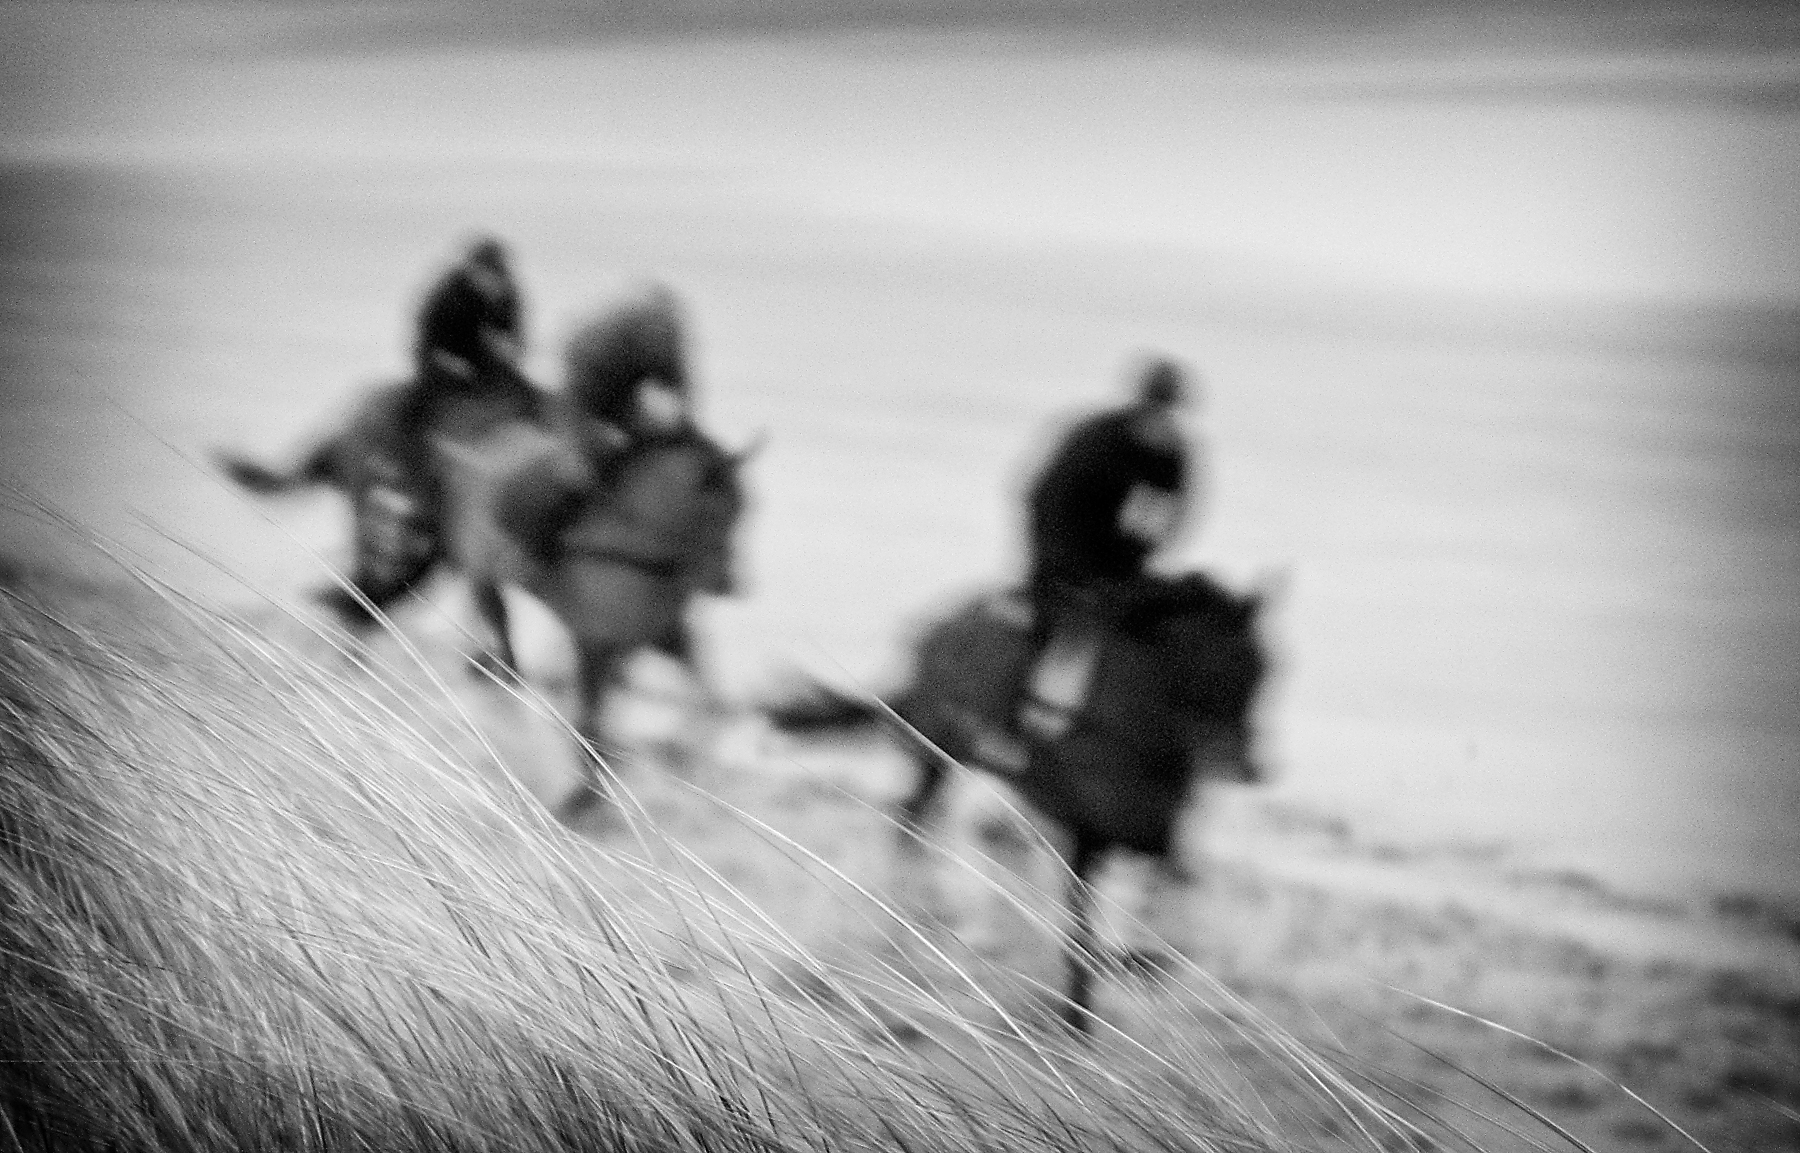 At The Gallop